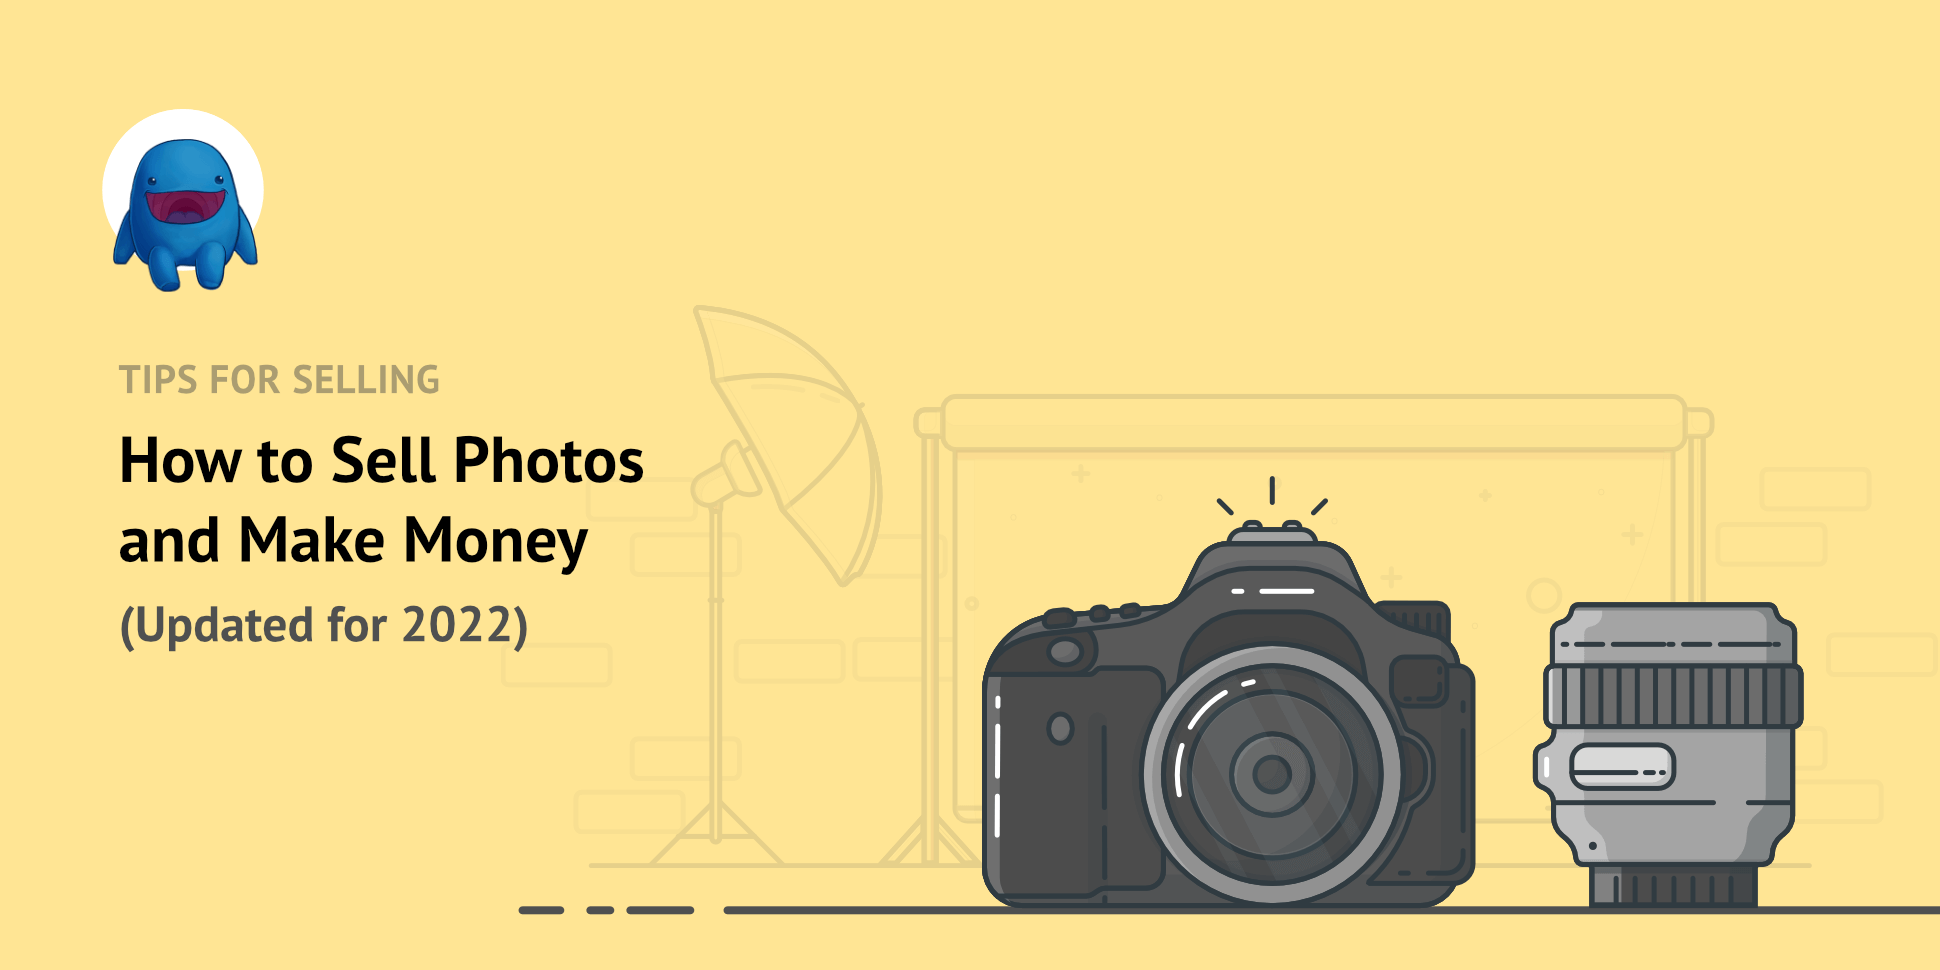 Illustration: a camera and lens